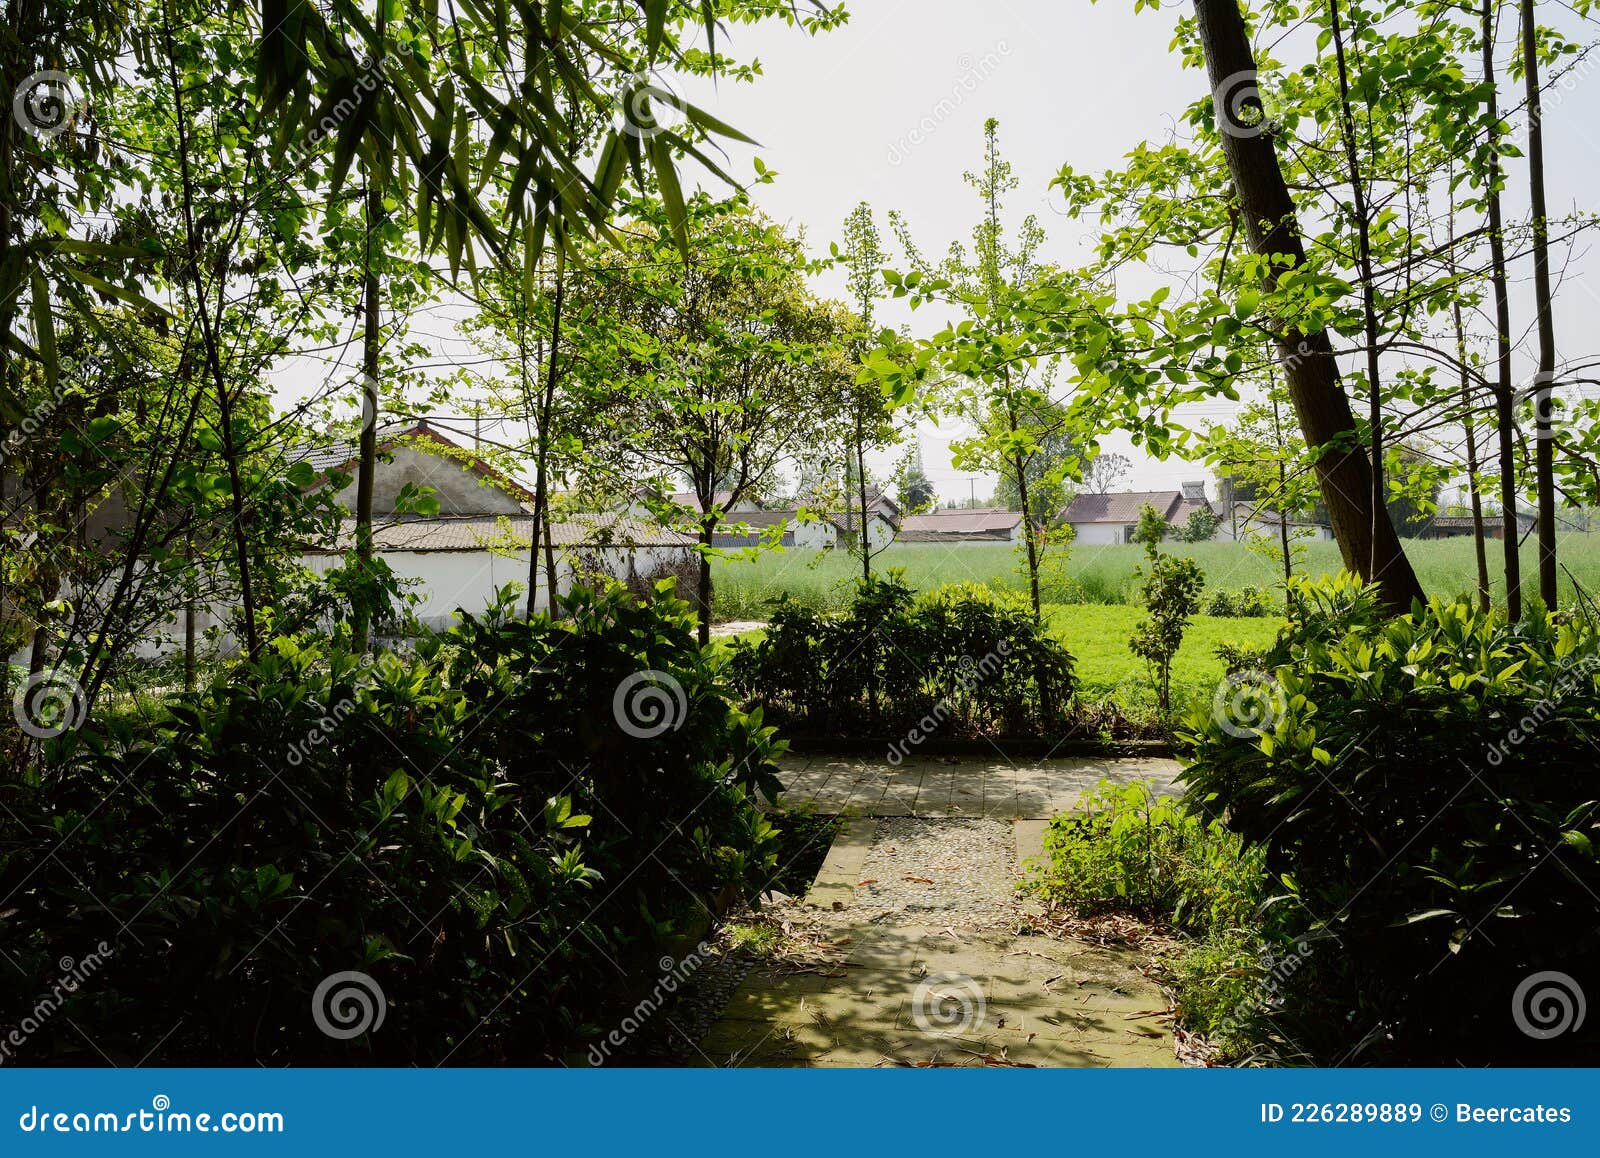 Shady Path in Village in Sunny Spring Stock Image - Image of sichuan ...